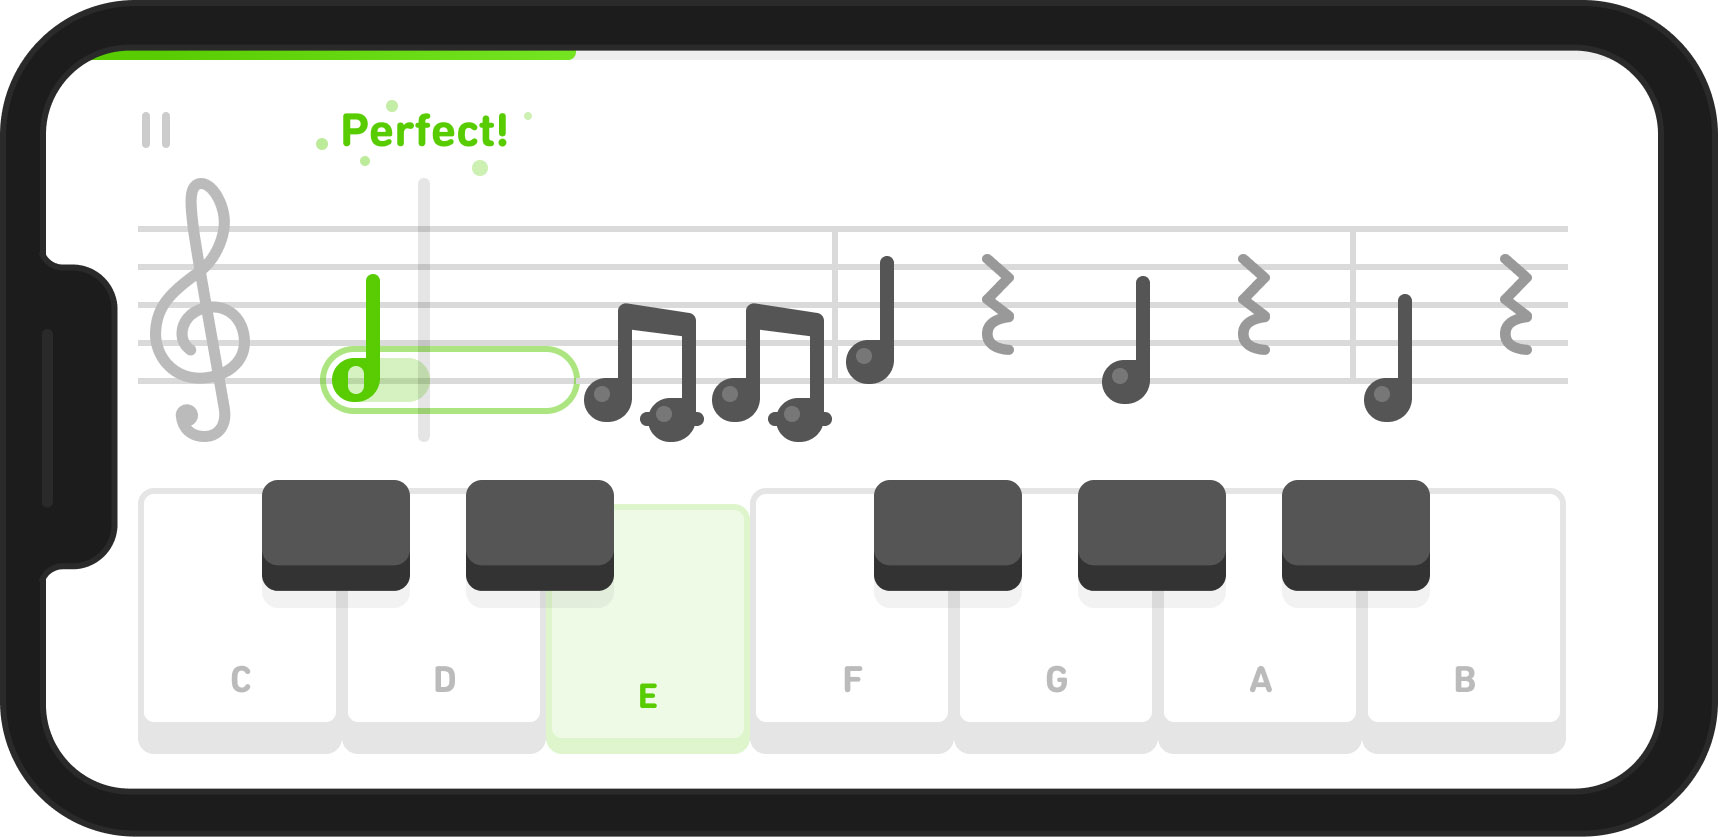 Duolingo will soon offer gamified music lessons